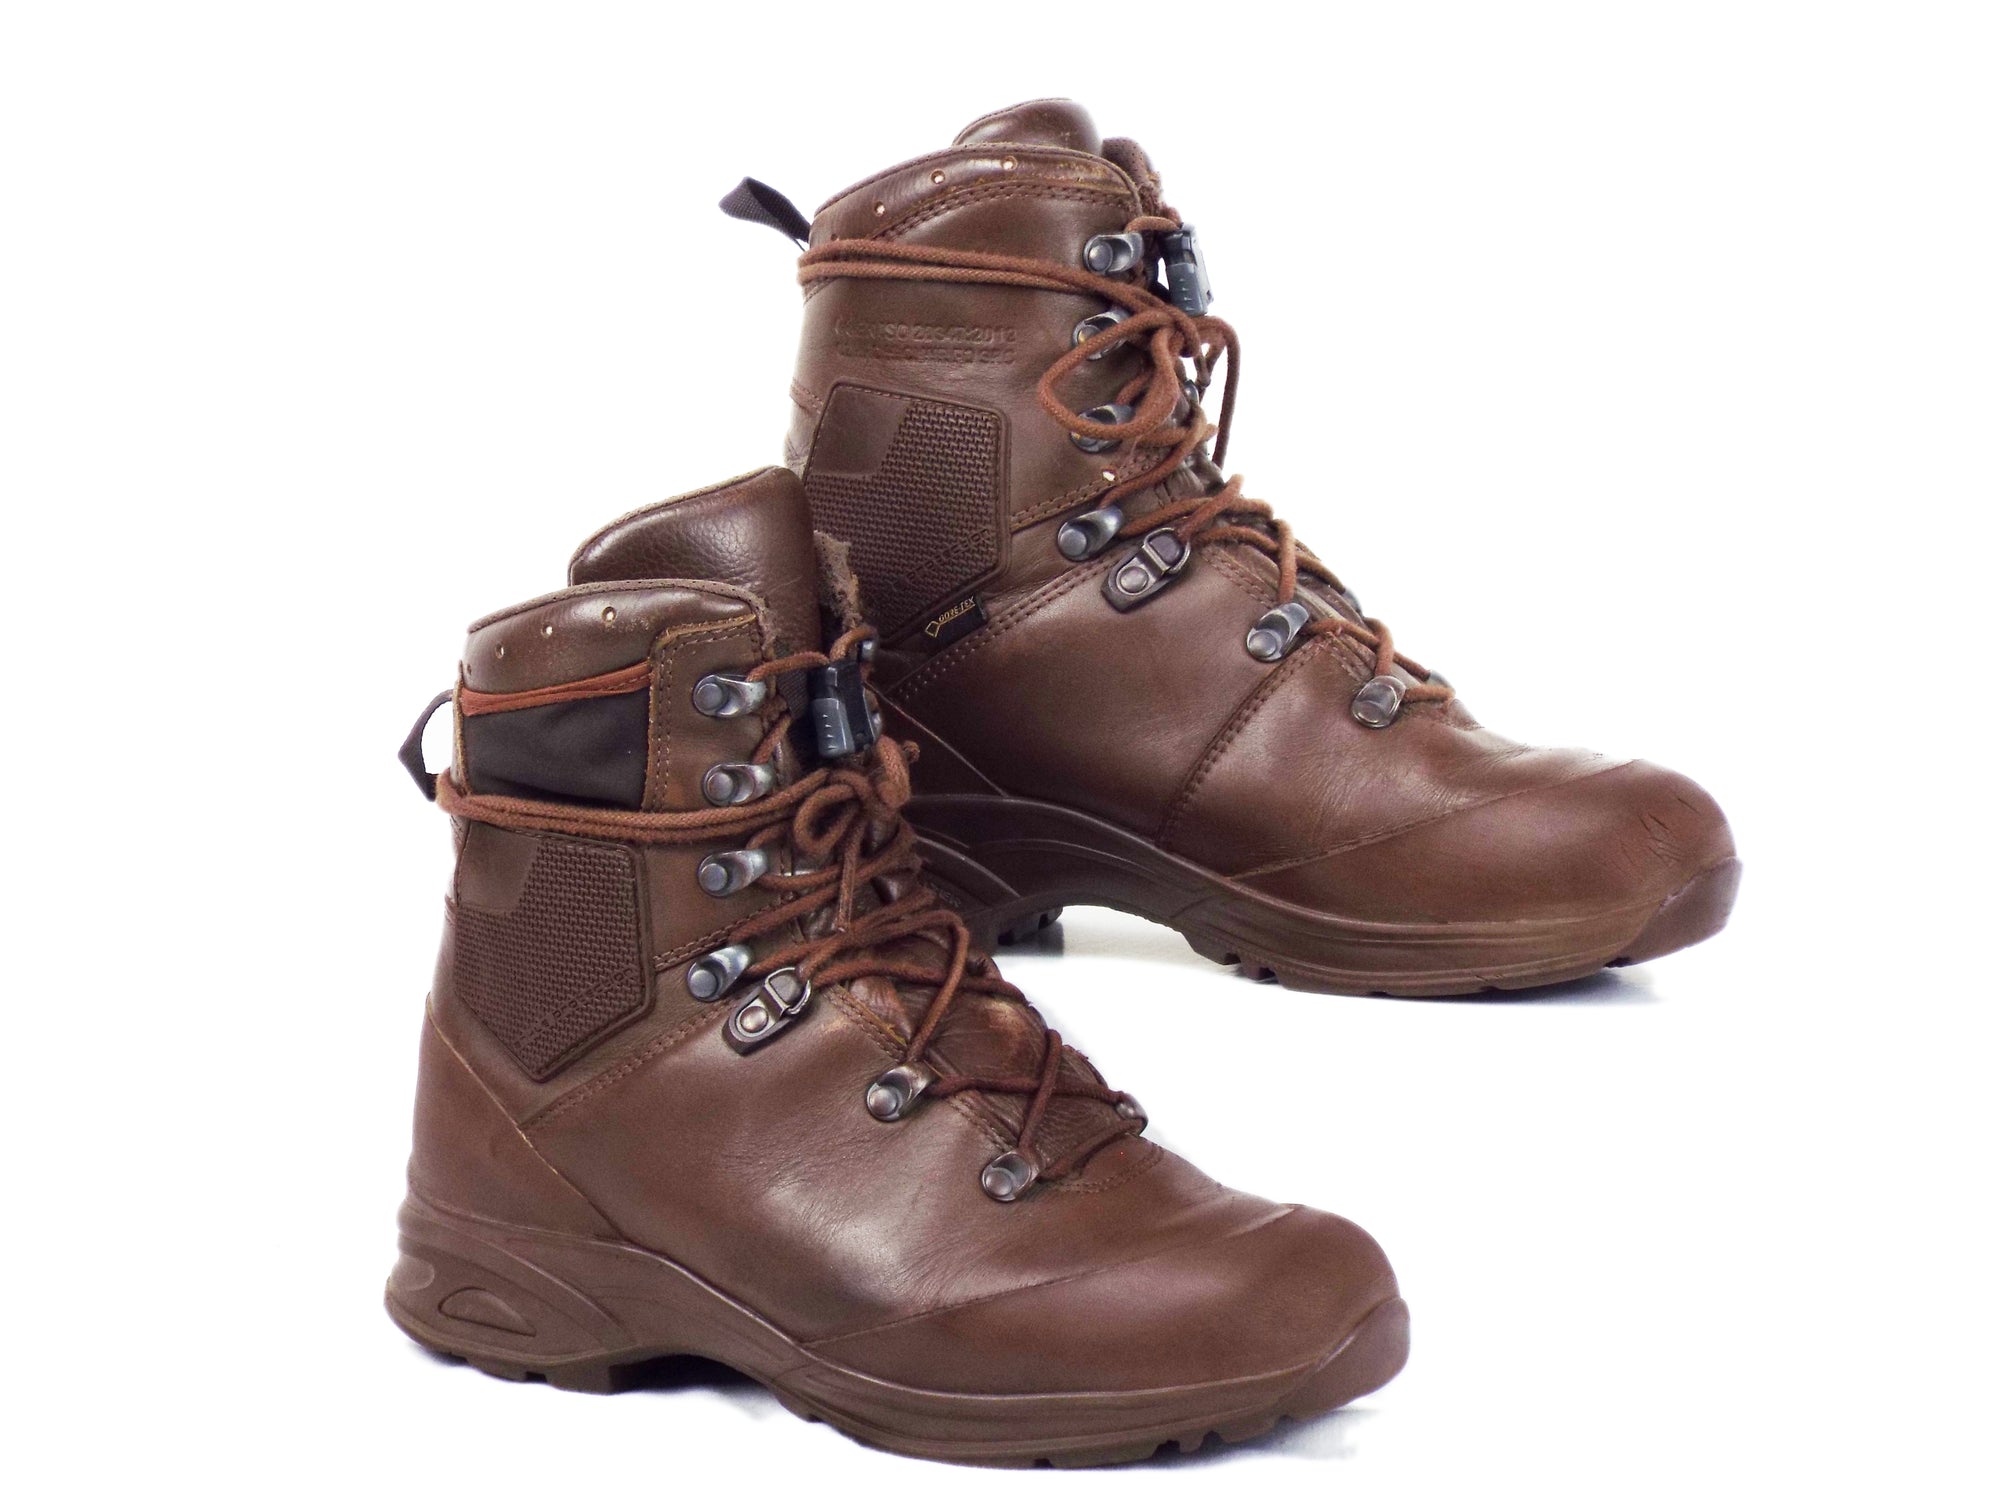 British / Dutch Army Brown Boots – Haix - with elasticated side pockets - Grade 1